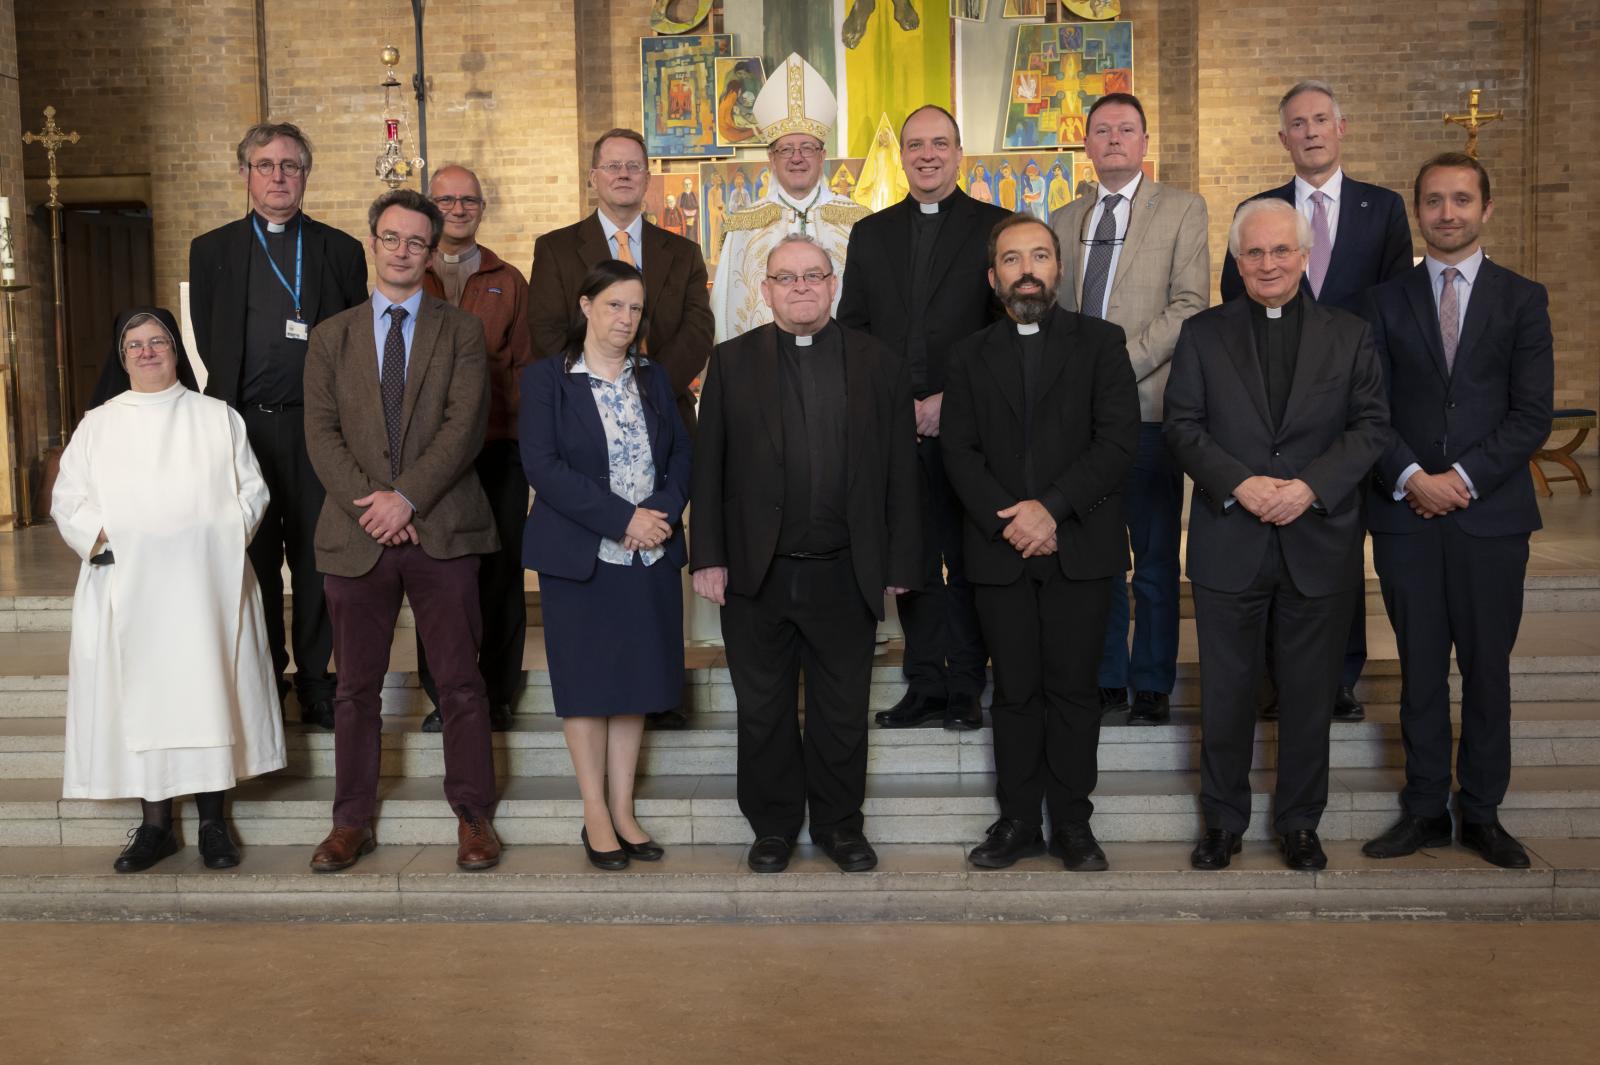 Teaching staff profess Faith and take Oath of Fidelity at Mater Ecclesiae College